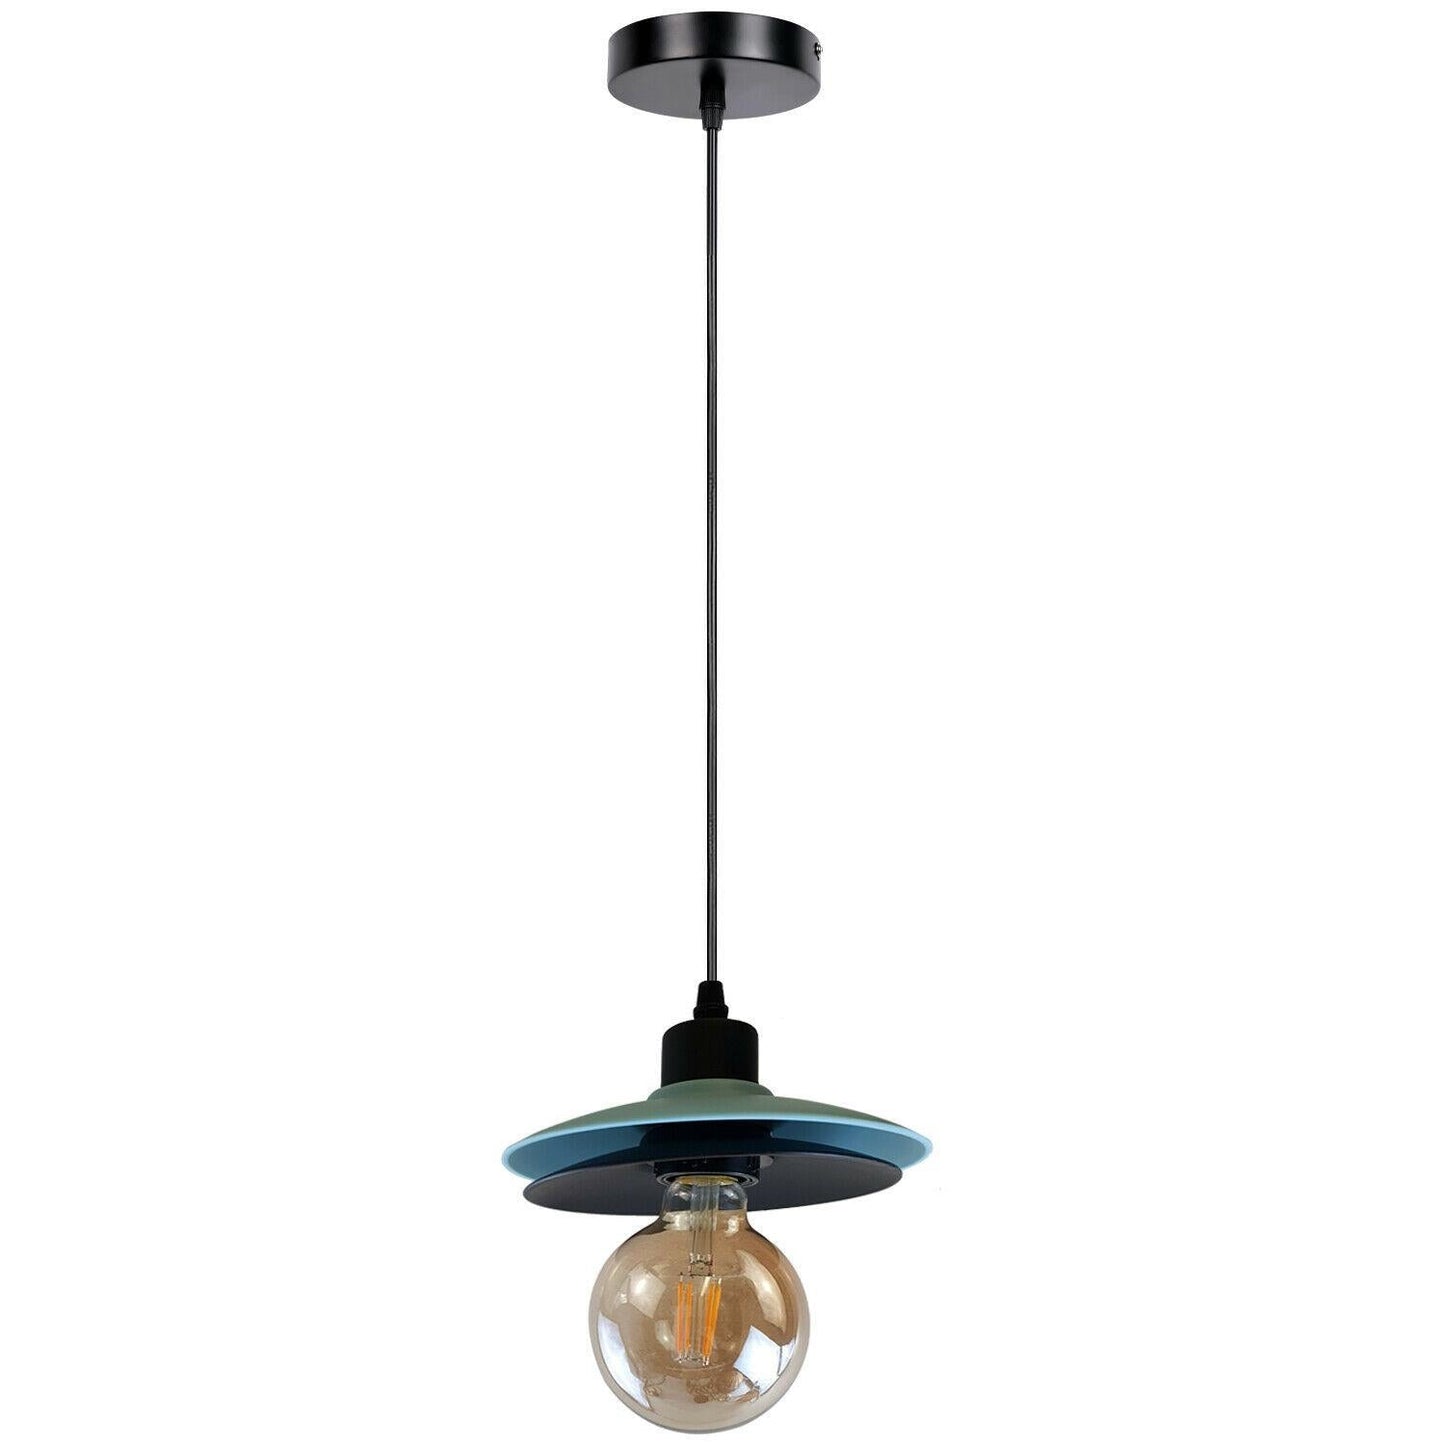 Double shade 2Pack Black And Blue Shade Ceiling Pendant Light